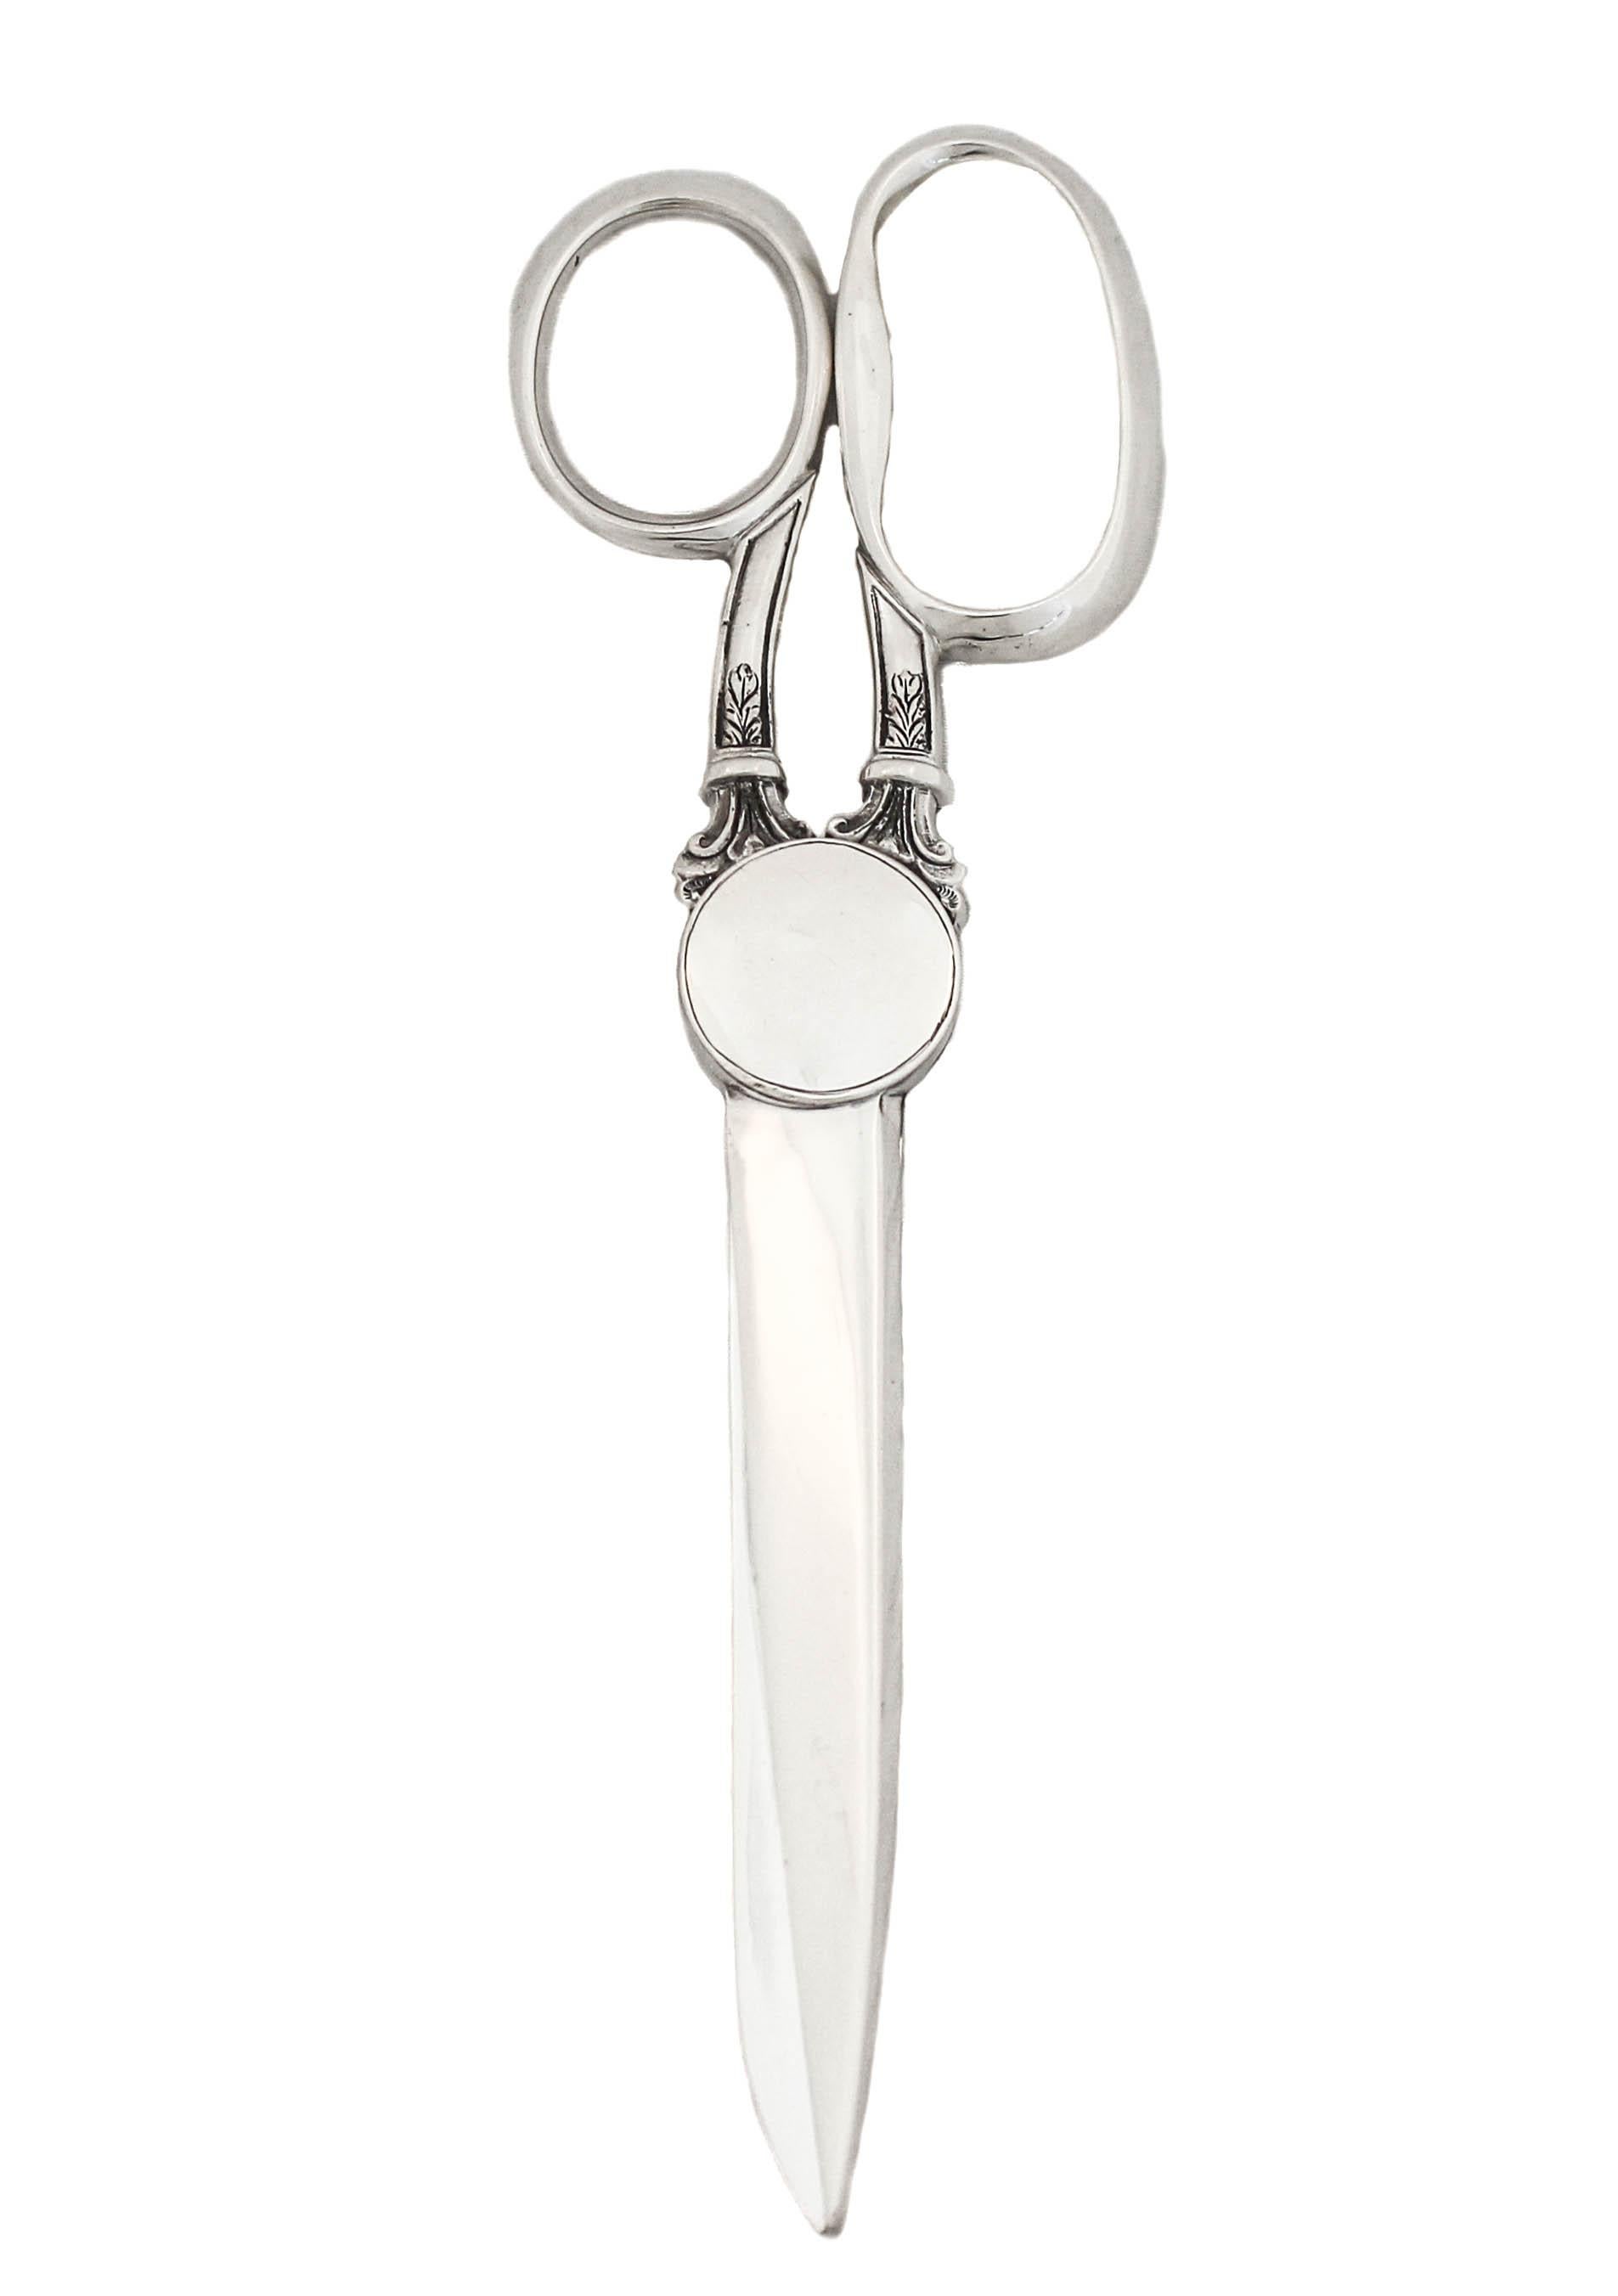 Being offered is a pair of sterling silver scissors in their original presentation box.  Made in England, they have that understated English look that is hard to miss.  What makes them so special is that they are in the original box from the